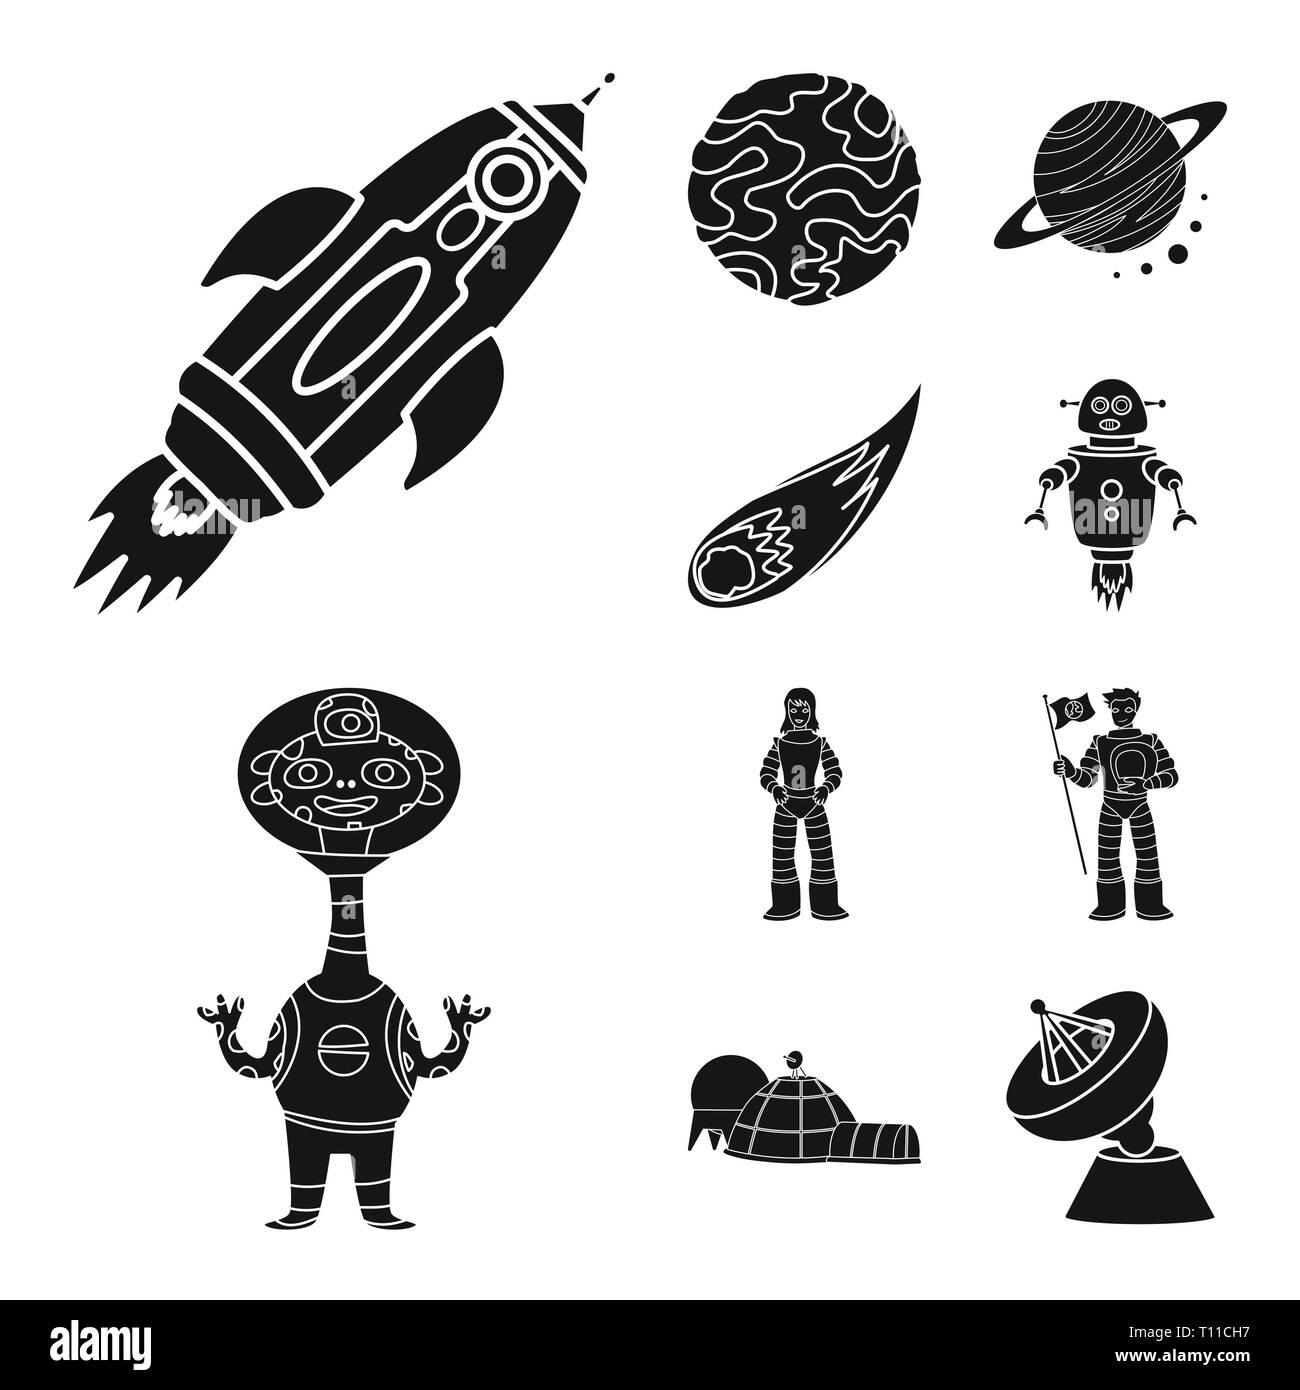 rocket,planet,comet,robot,alien,astronaut,base,antenna,launch,mars,system,asteroid,program,woman,man,satellite,ship,star,solar,meteor,future,fantasy,suit,cosmonaut,dish,spaceship,gravity,orbit,colonization,sky,space,galaxy,universe,travels,science,cosmic,astronomy,technology,set,vector,icon,illustration,isolated,collection,design,element,graphic,sign,black,simple Vector Vectors , Stock Vector